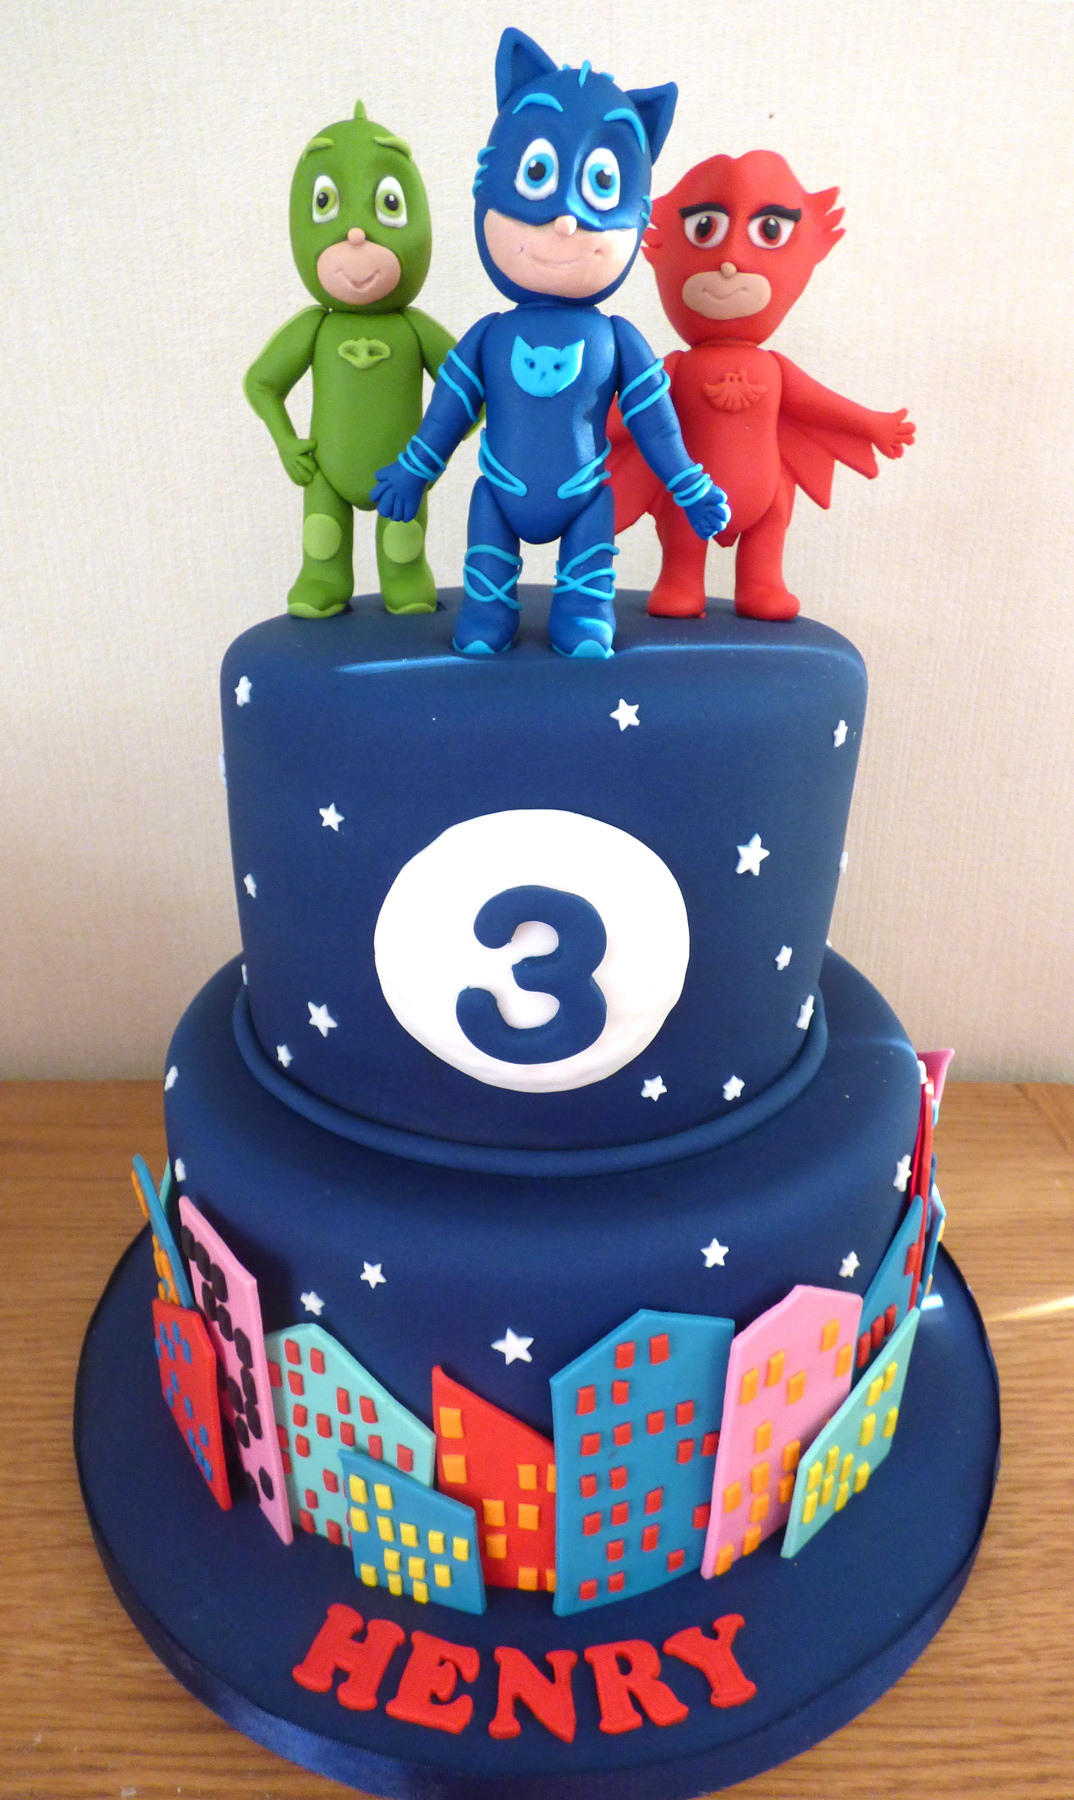 PJ Masks Birthday Cake Topper : Buy Online at Best Price in KSA - Souq is  now Amazon.sa: Arts & Crafts